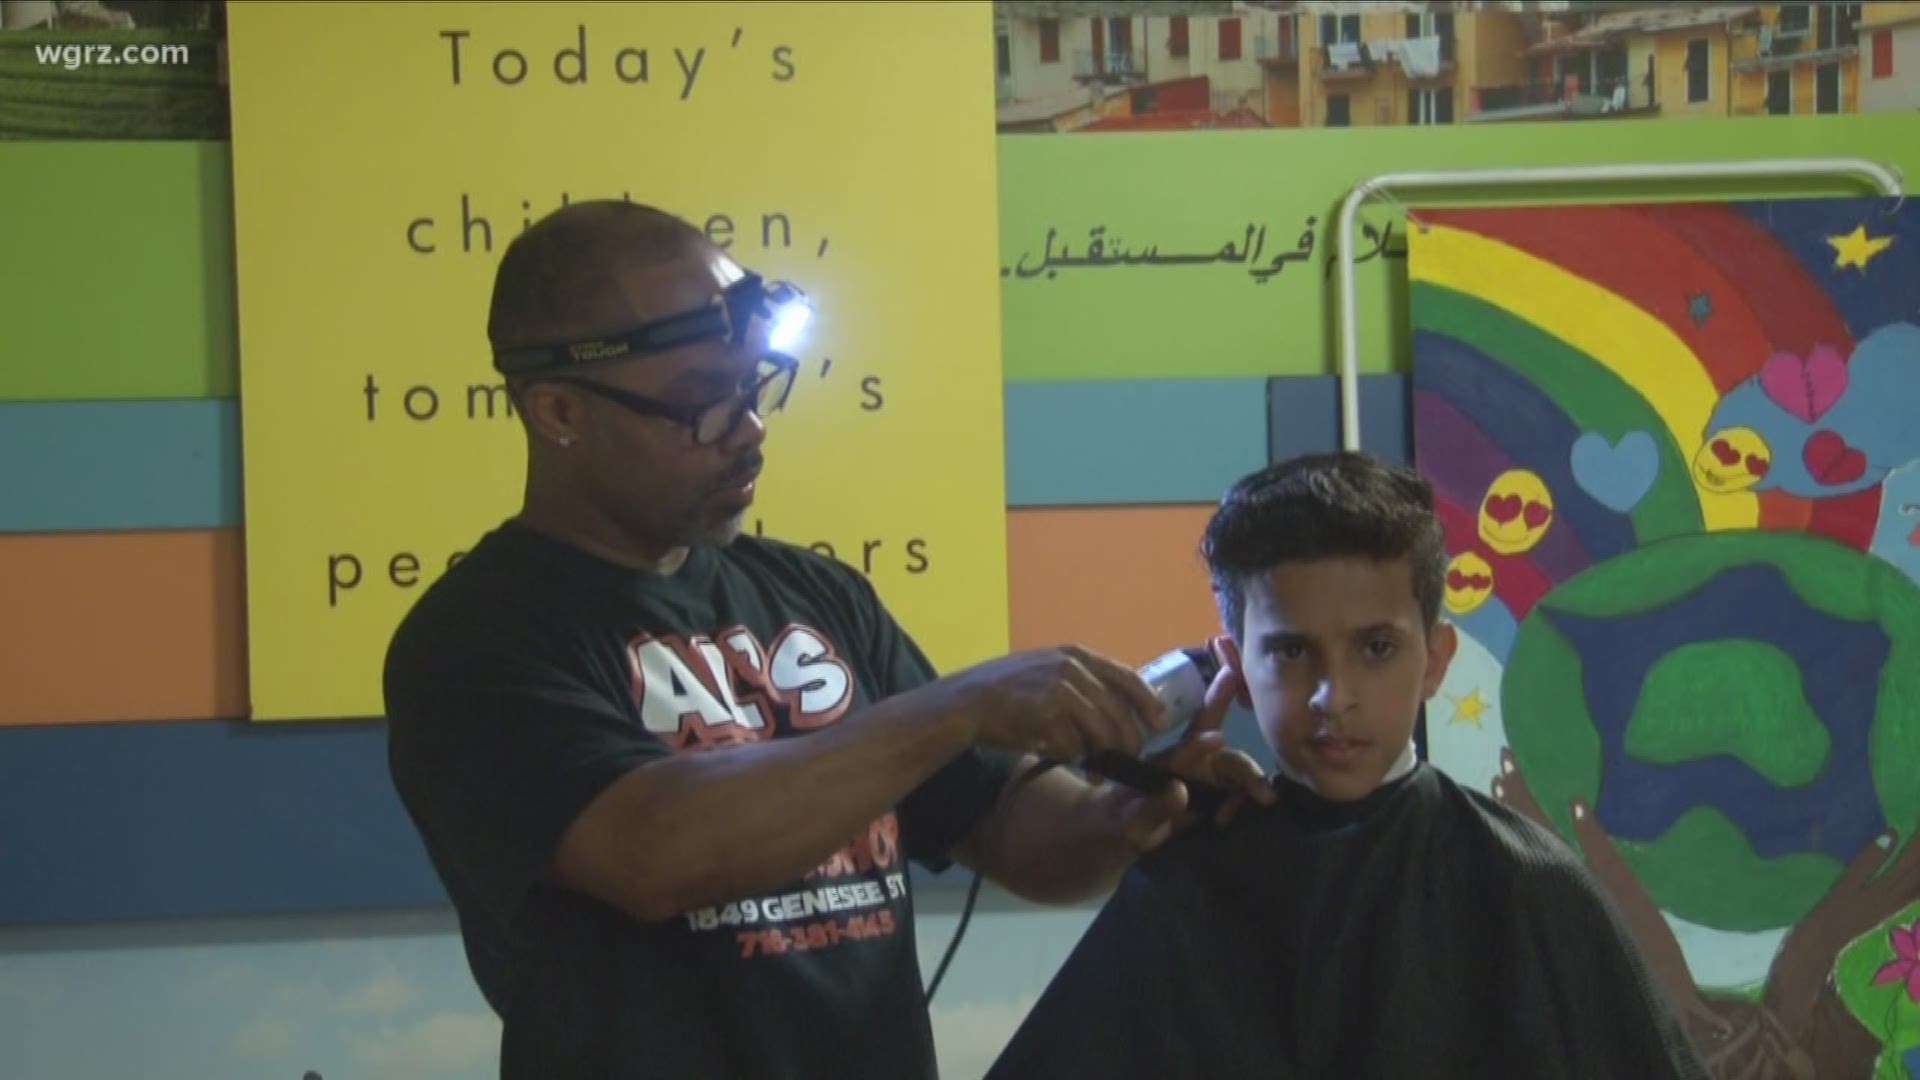 where his students train by giving free haircuts to kids at the international school in Buffalo.